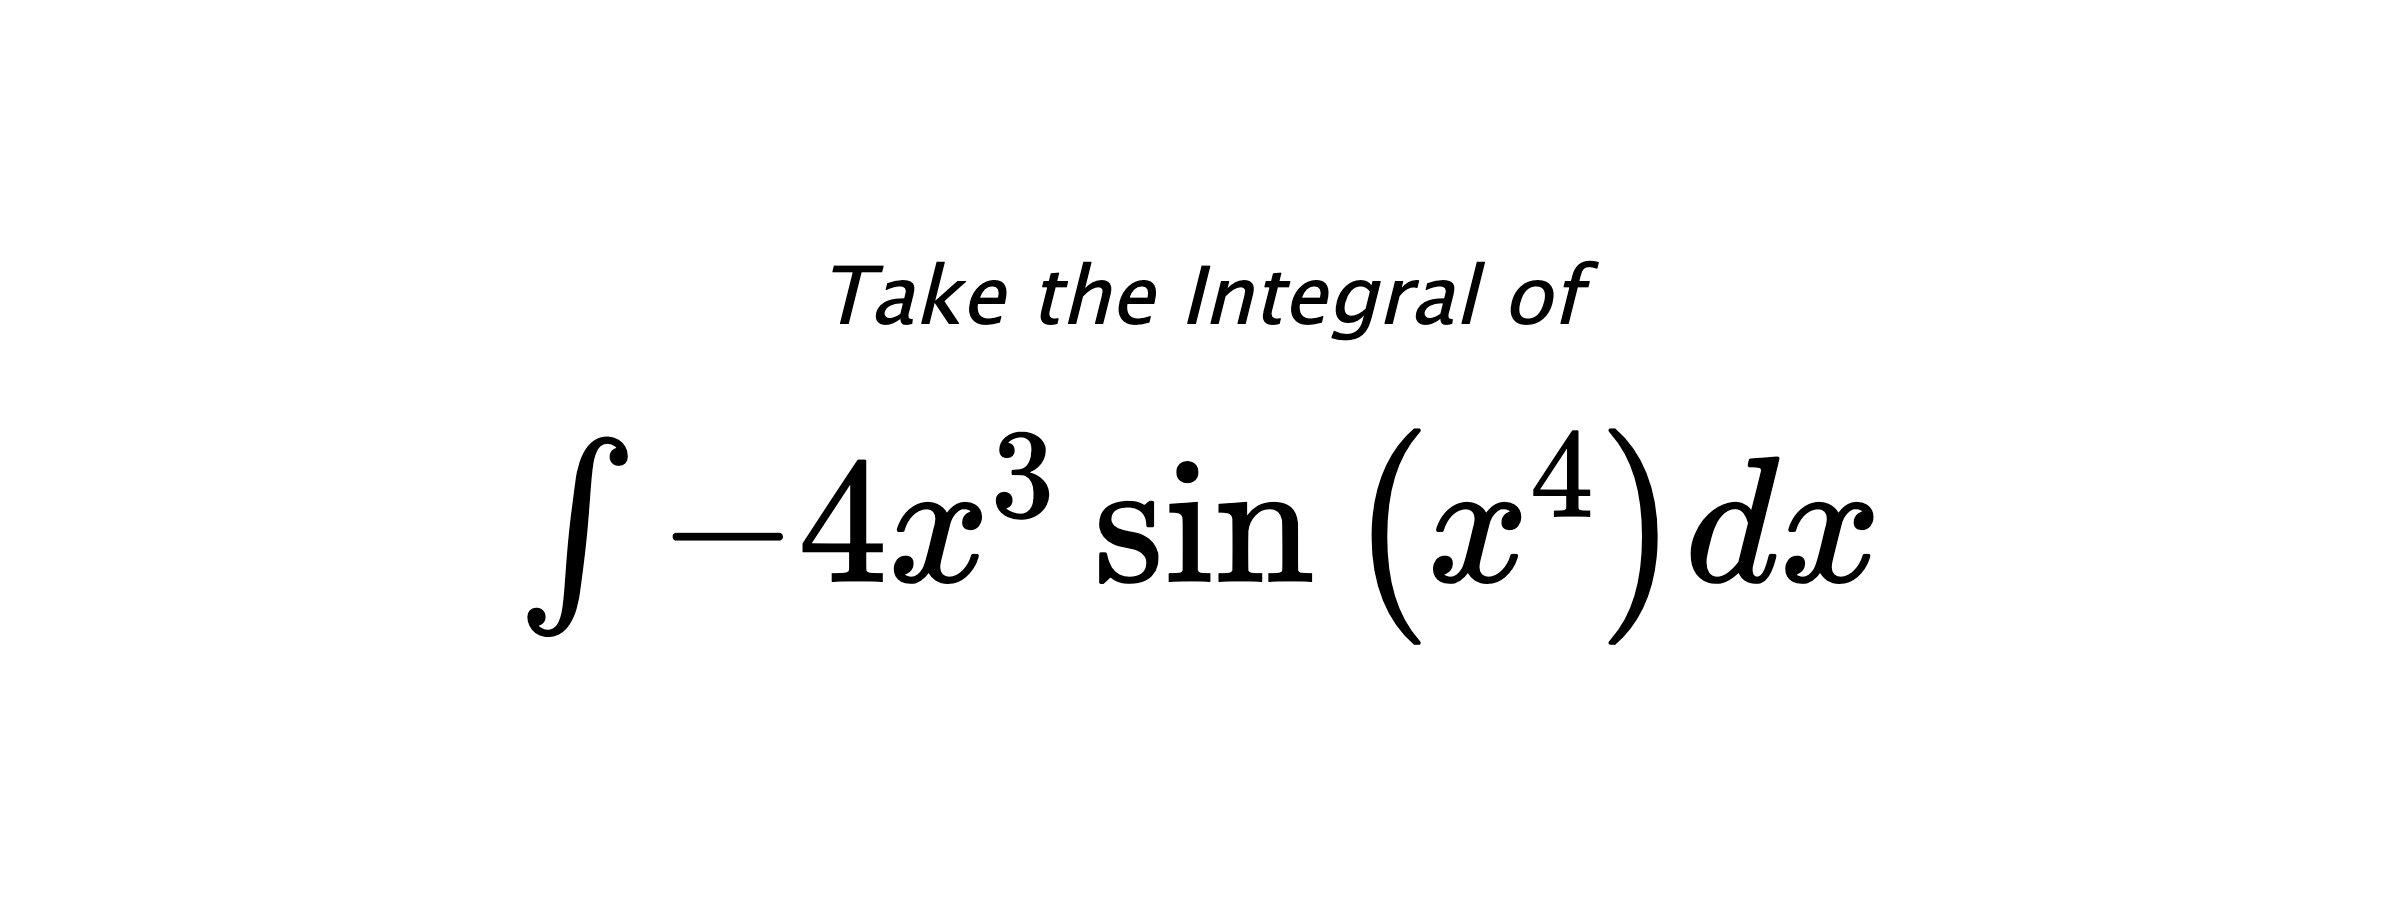 Take the Integral of $ \int - 4 x^{3} \sin{\left(x^{4} \right)} dx $